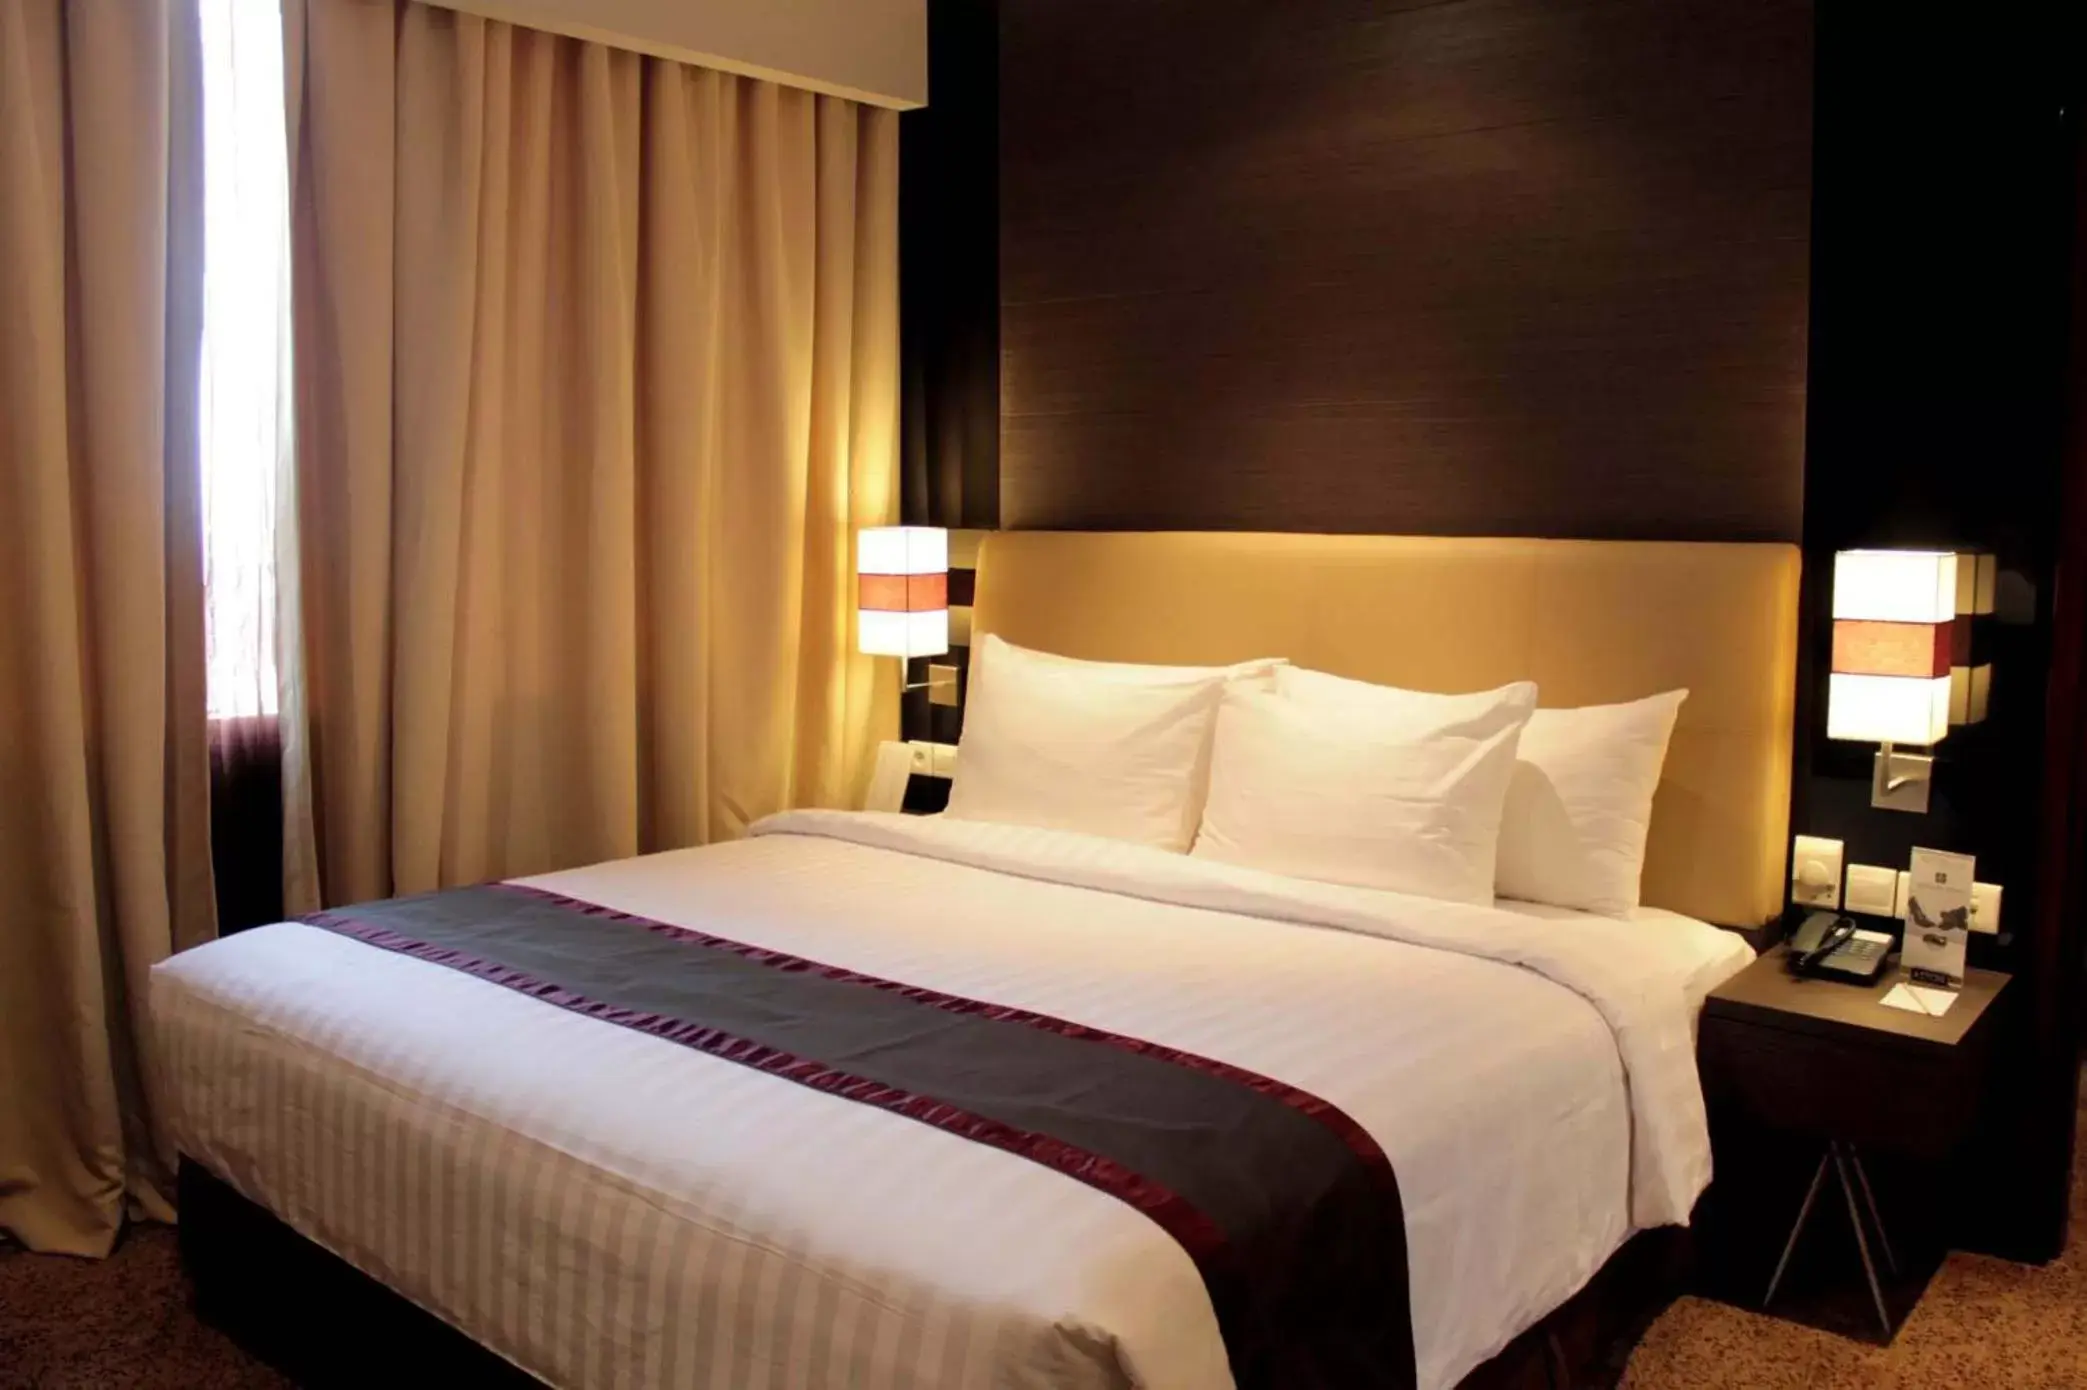 Bedroom, Bed in ASTON Jambi Hotel & Conference Center